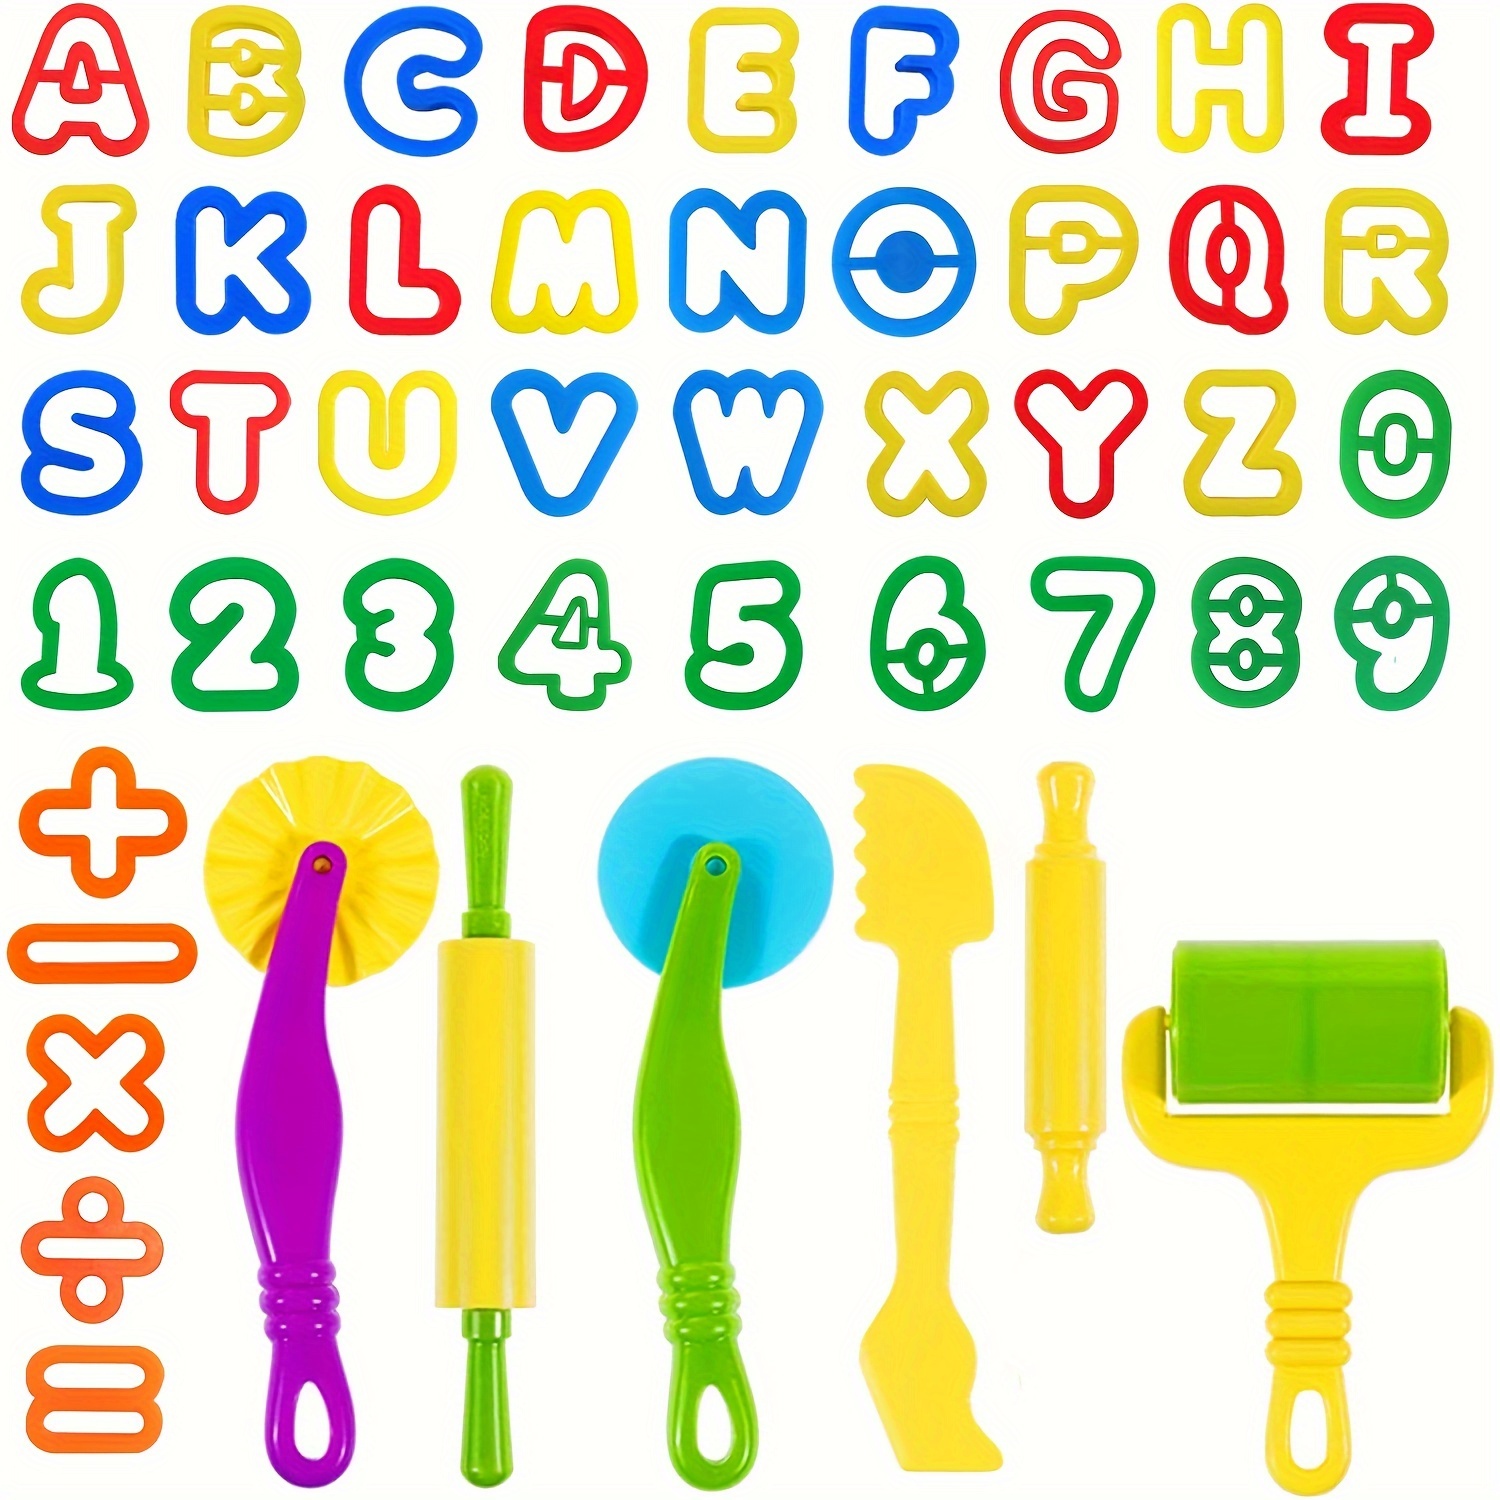 

47 Piece Plastic Dough Tools Set For Kids With Alphabet, Numbers, And Symbols Cutters - Uncharged Manual Playdough Accessories For Creative Ceramics And Pottery Crafting